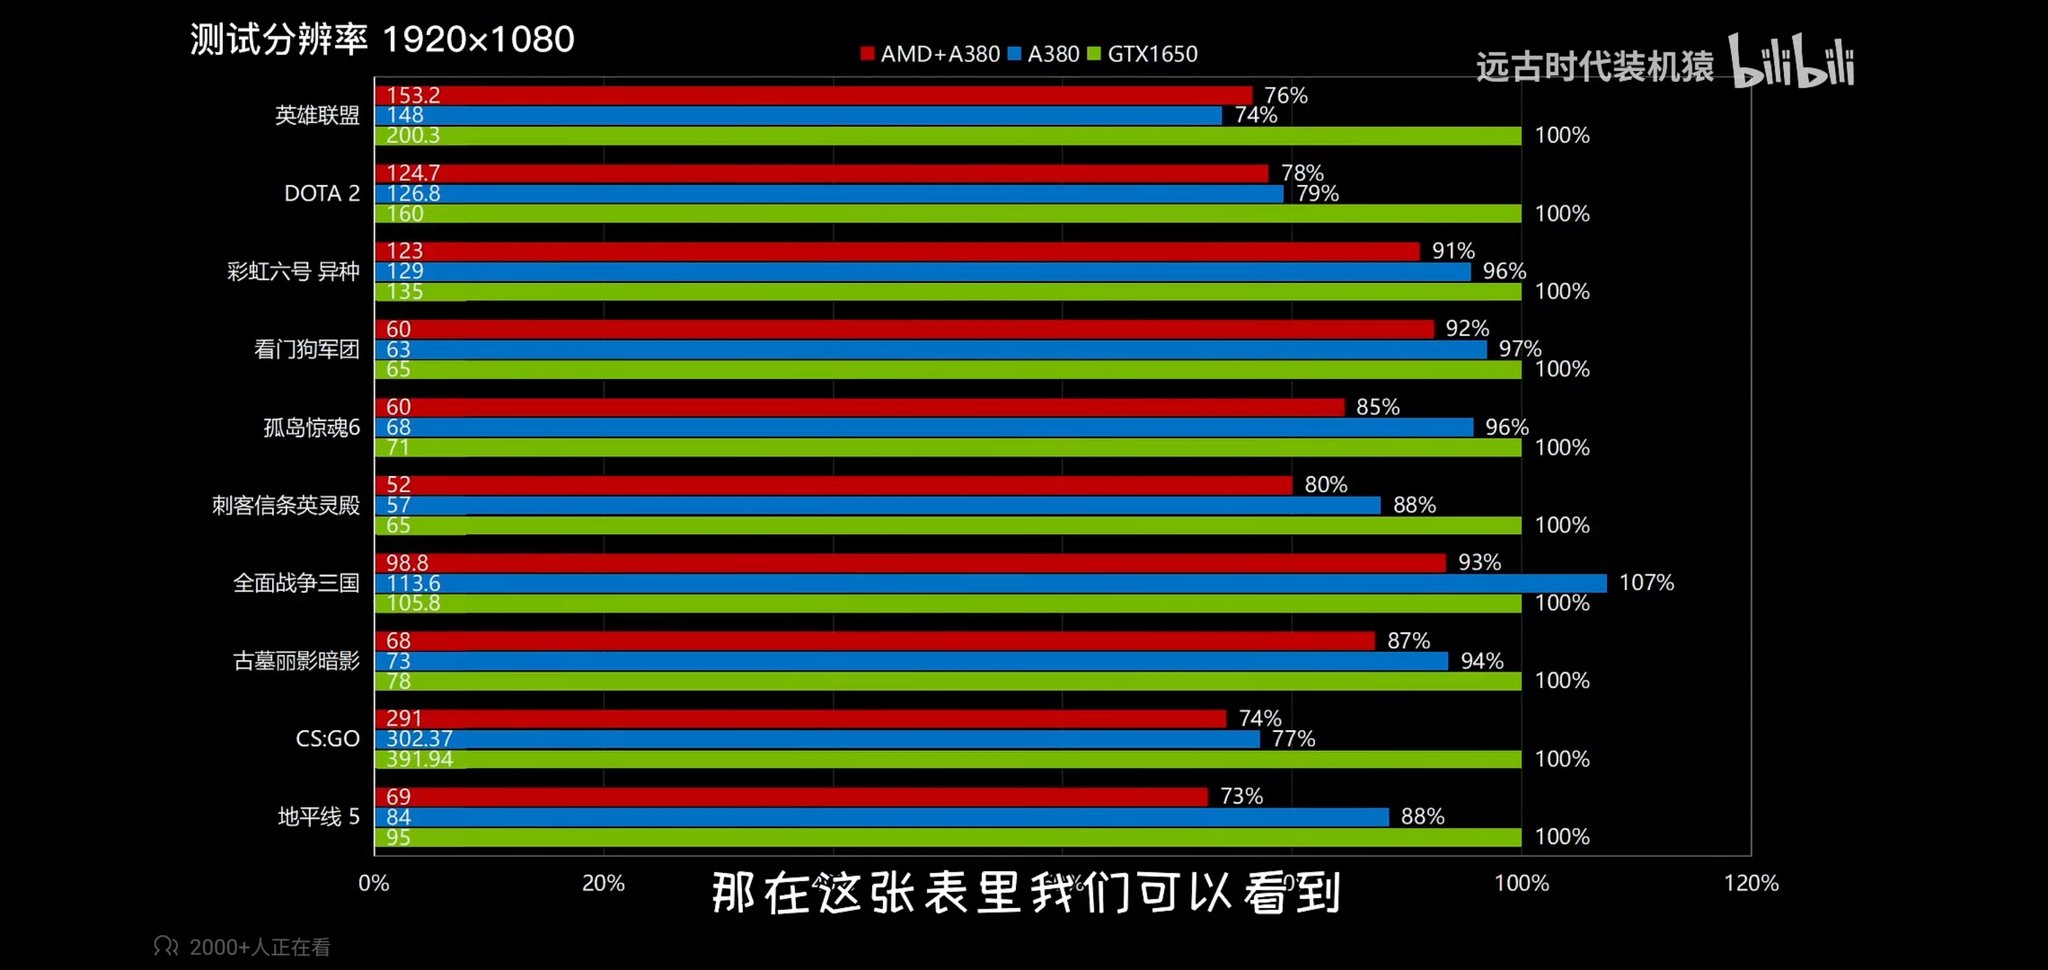 Media asset in full size related to 3dfxzone.it news item entitled as follows: Benchmarks: Intel Arc A380 vs NVIDIA GeForce GTX 1650 con CPU AMD e Intel | Image Name: news33406_Intel-ARC-Benchmark_1.jpg